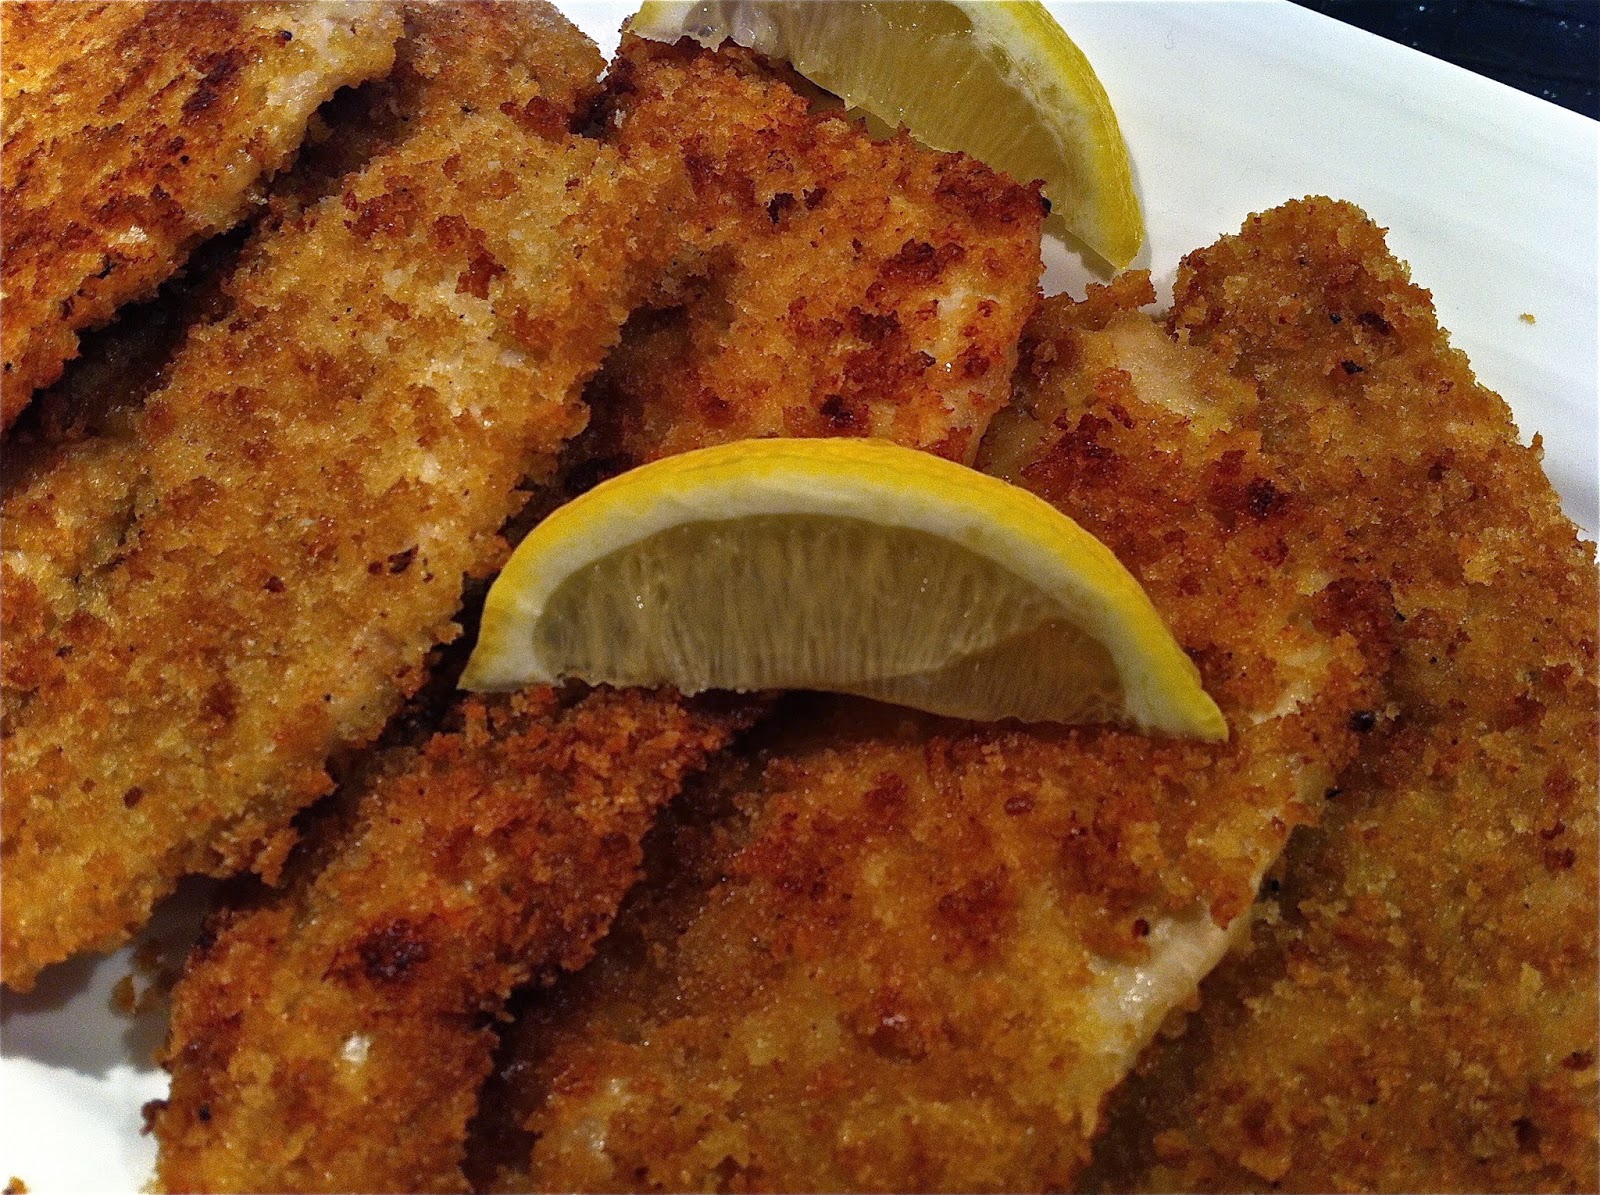 Homemade By Mary: EASY OVEN BAKED TURKEY SCHNITZEL with PANKO BREAD CRUMBS